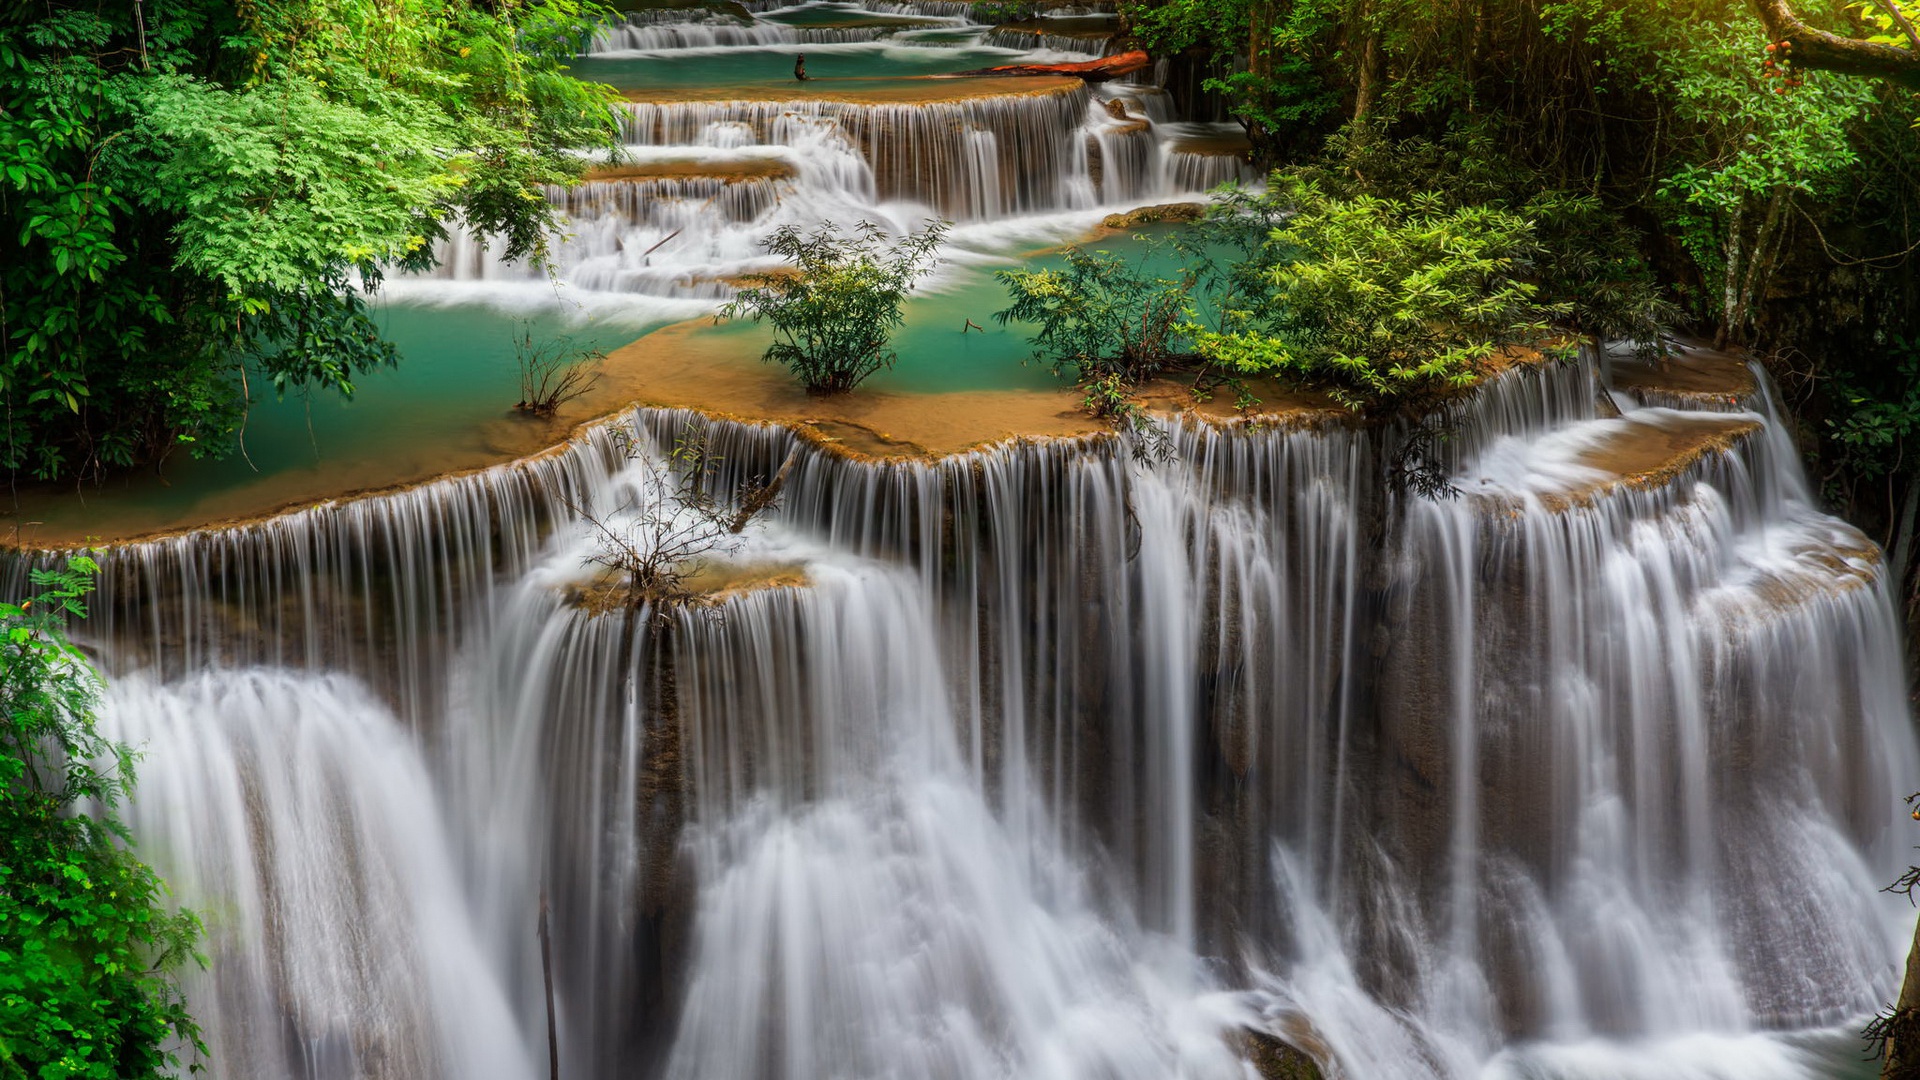 General 1920x1080 landscape nature river forest plants waterfall